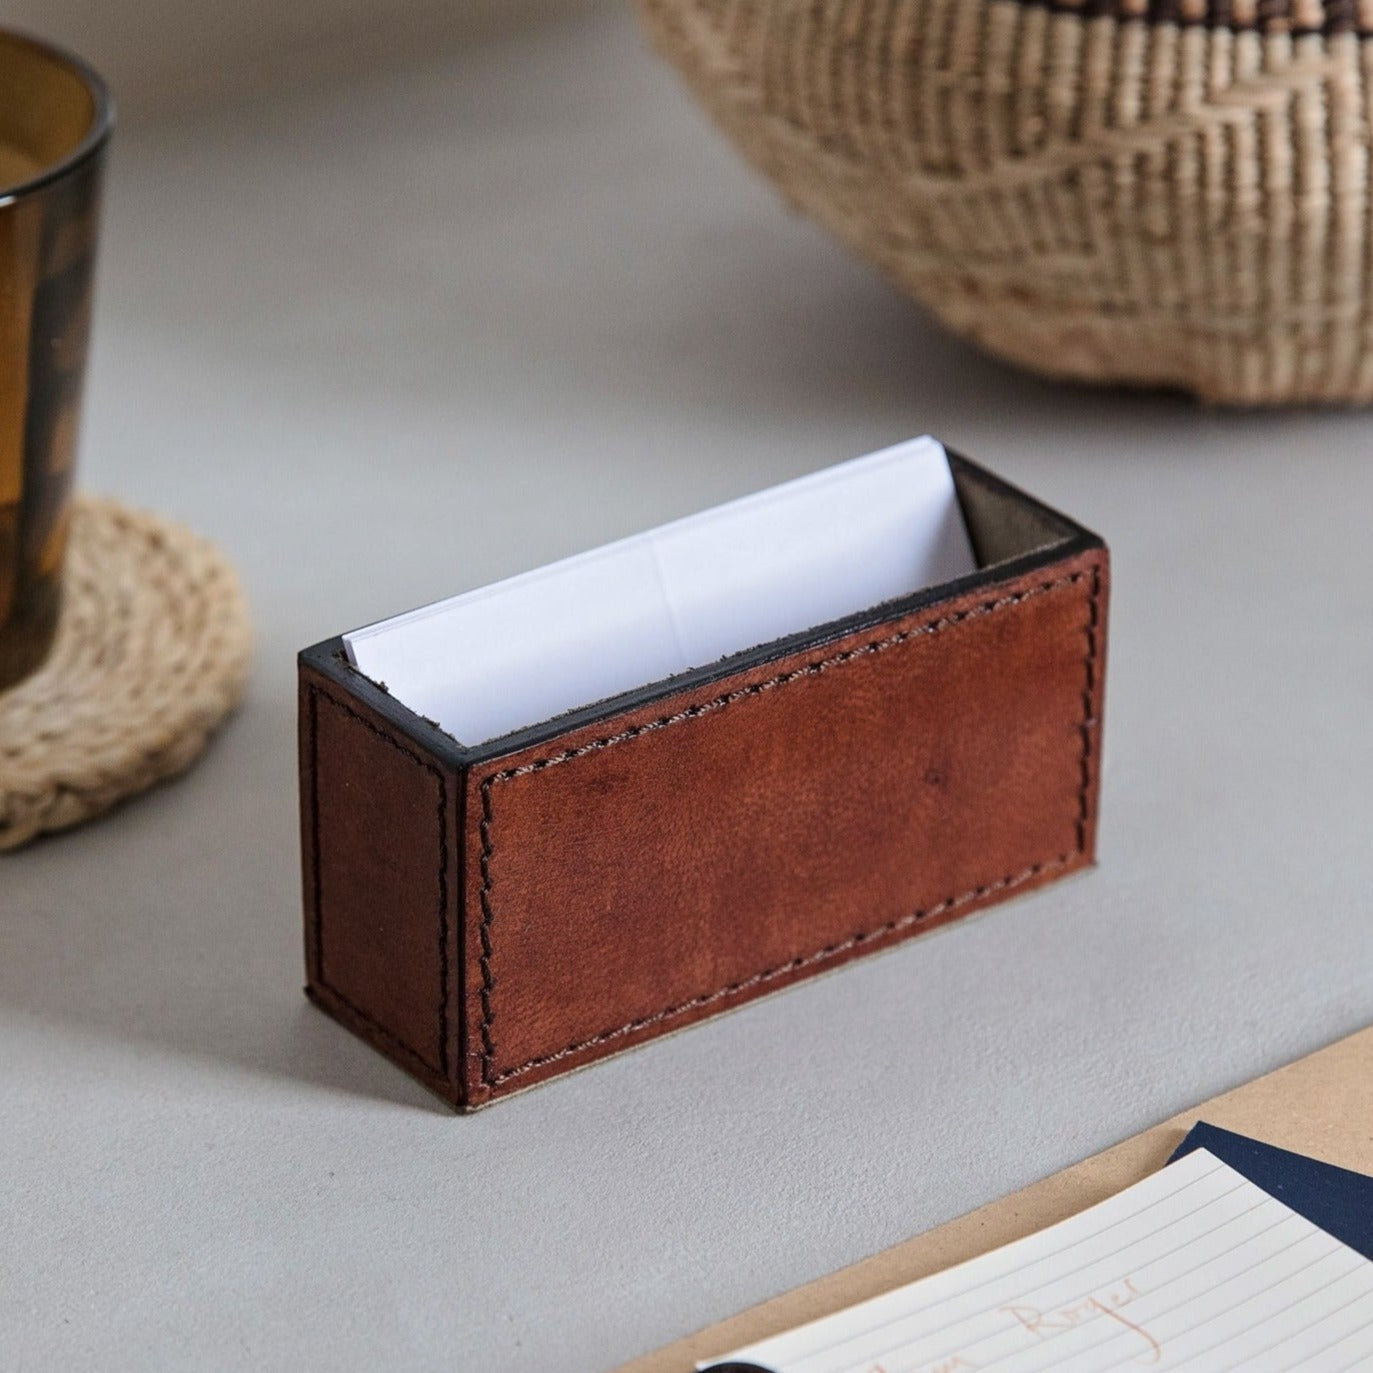 Timeless tan leather business card holder for easy desktop storage. Personalise for a thoughtful gift to celebrate a new job.